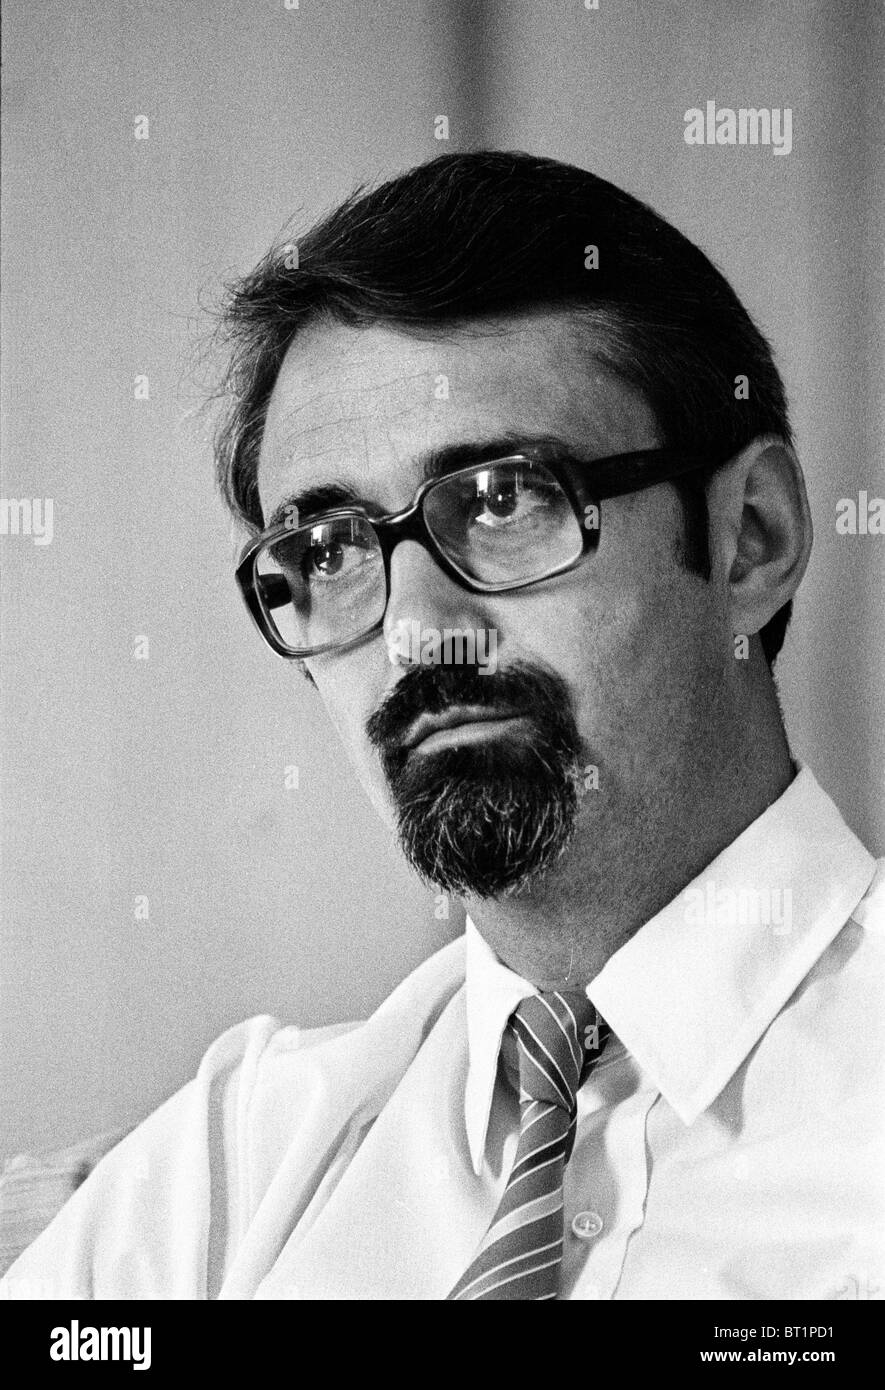 Portrait during interview of Percy Barnevik in 1982 as CEO of ASEA, later ABB business executive captain of industry Stock Photo